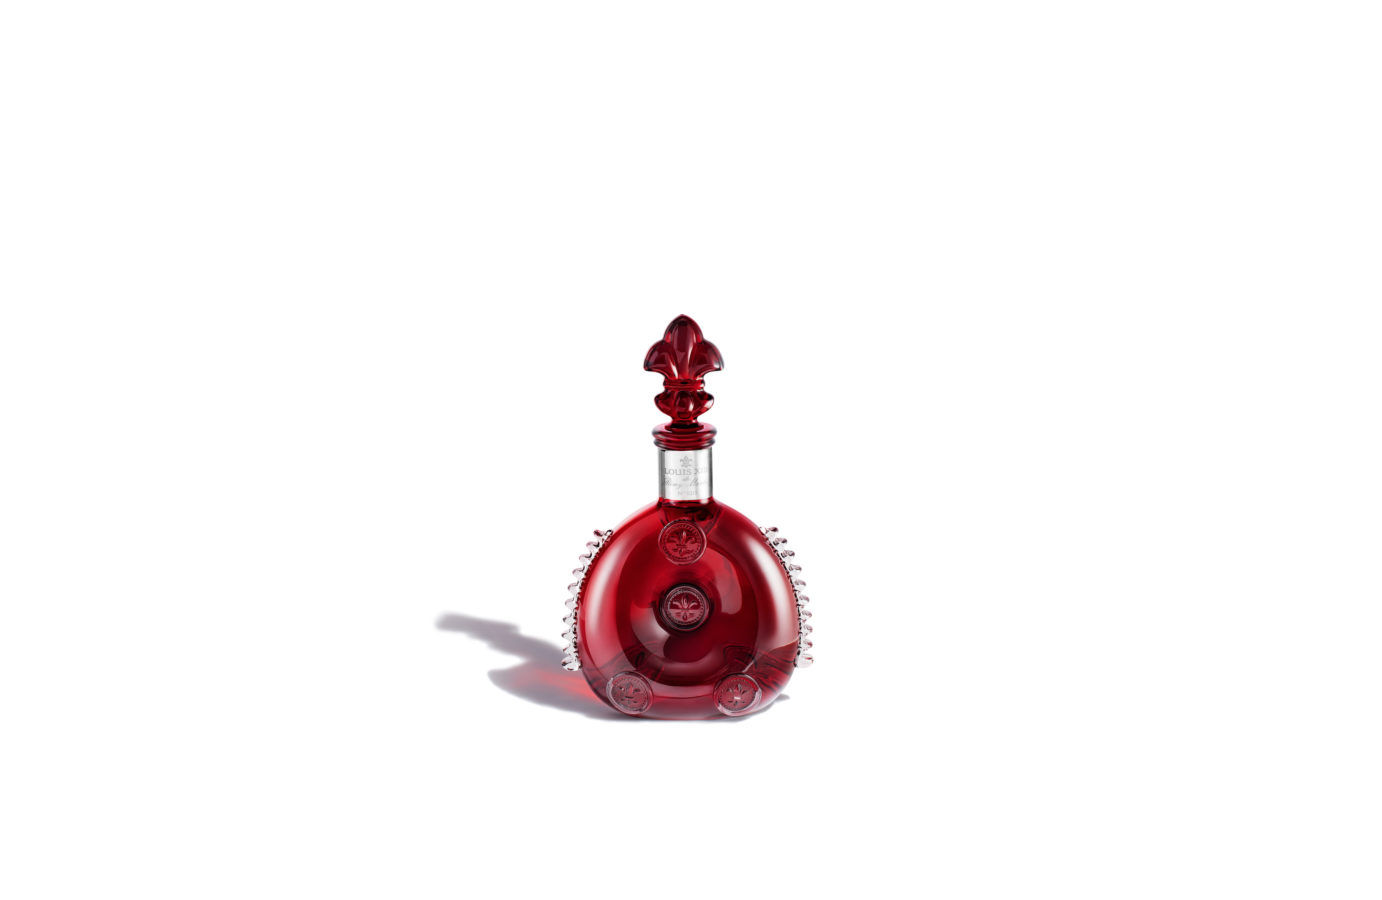 LOUIS XIII is releasing the ultra-rare red decanter, only 200